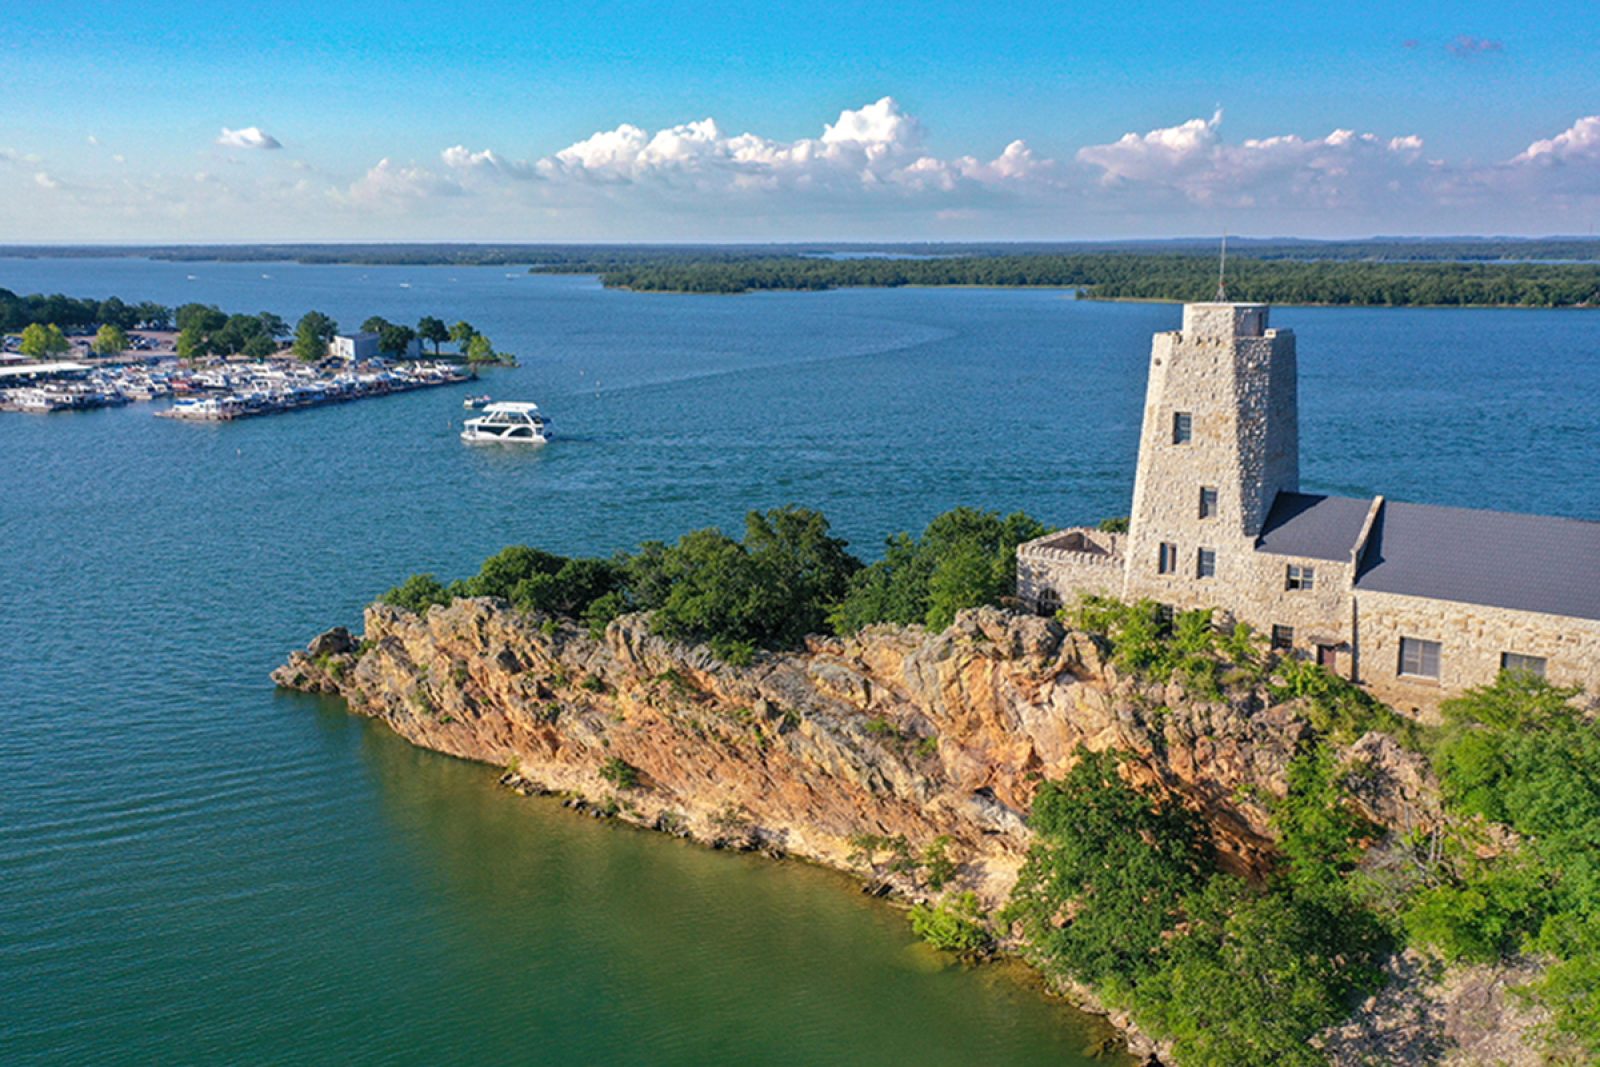 Aerial view of Tucker Tower on Lake Murray in Ardmore Oklahoma on a summer day with a houseboat in the distance